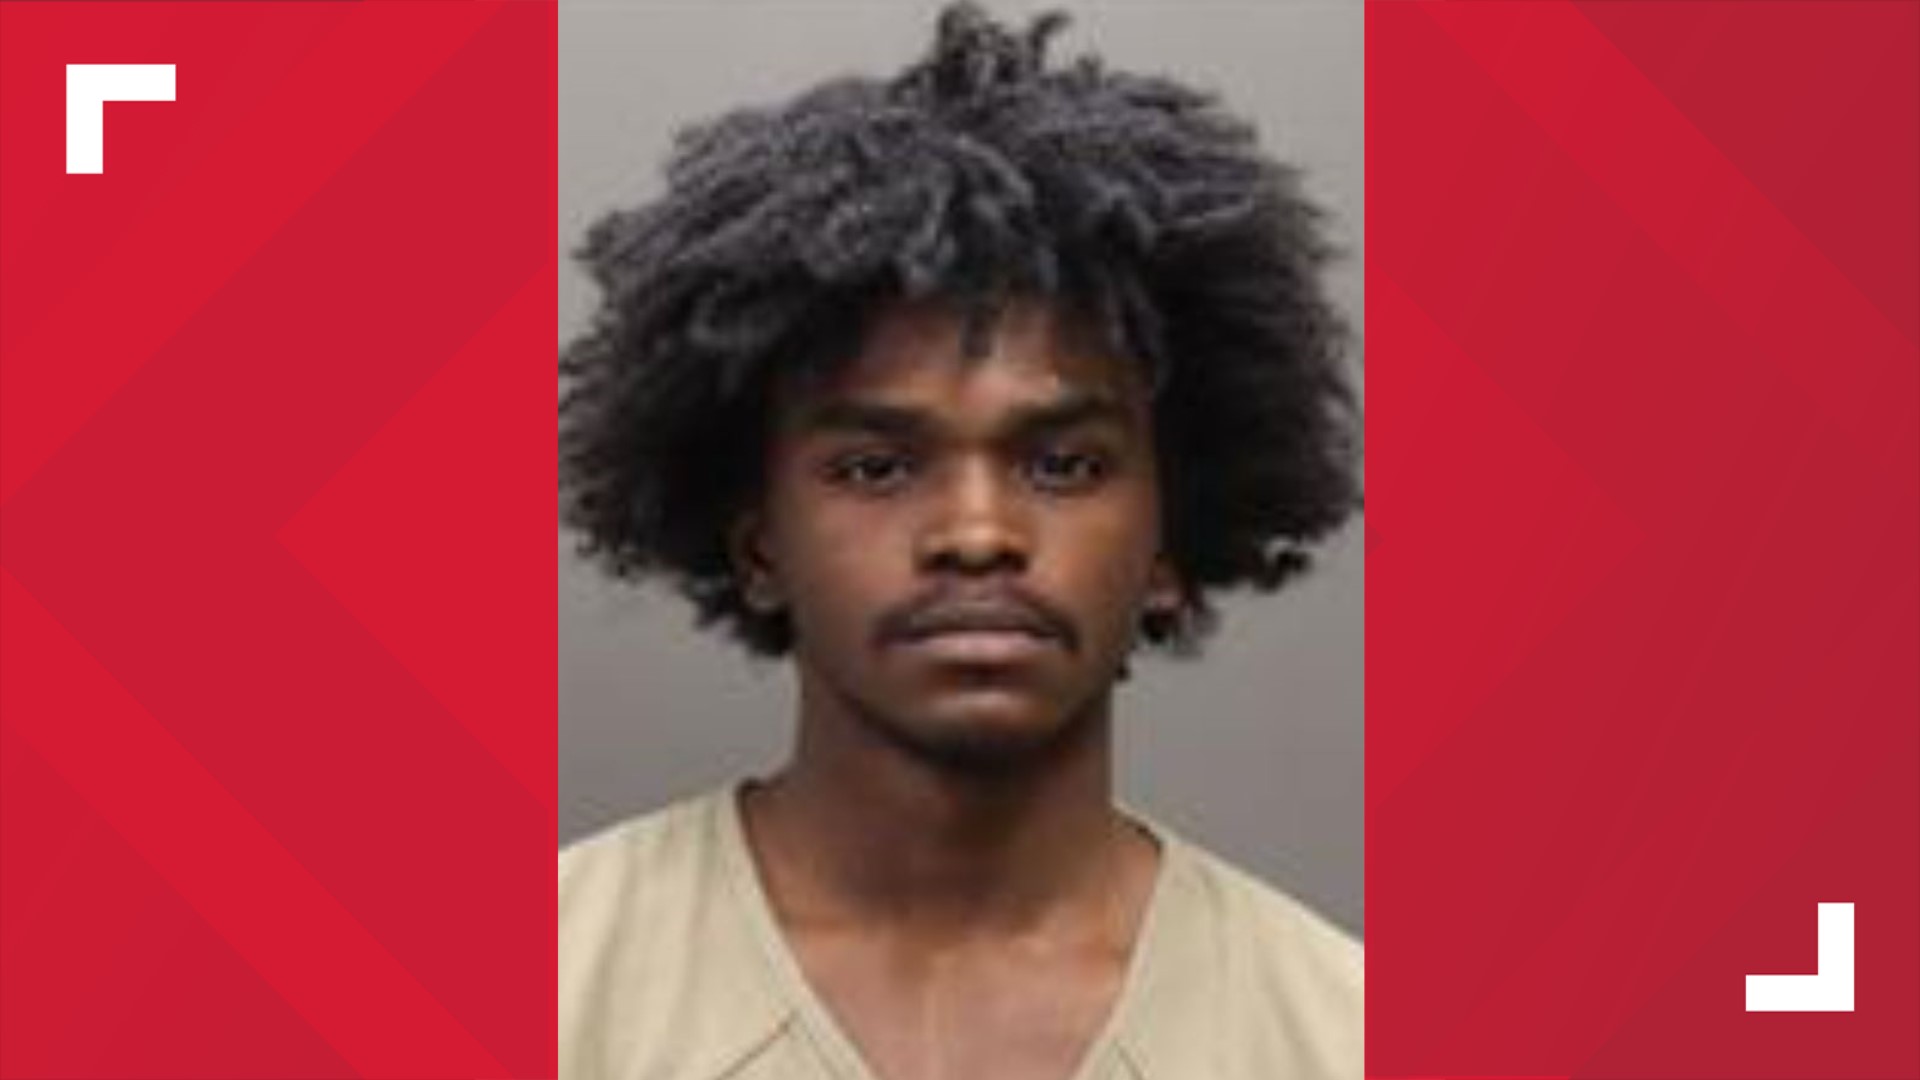 Michael Green is charged with murder, discharging a firearm into a habitation and seven counts of felony assault in the shooting death of Indiah Corley.